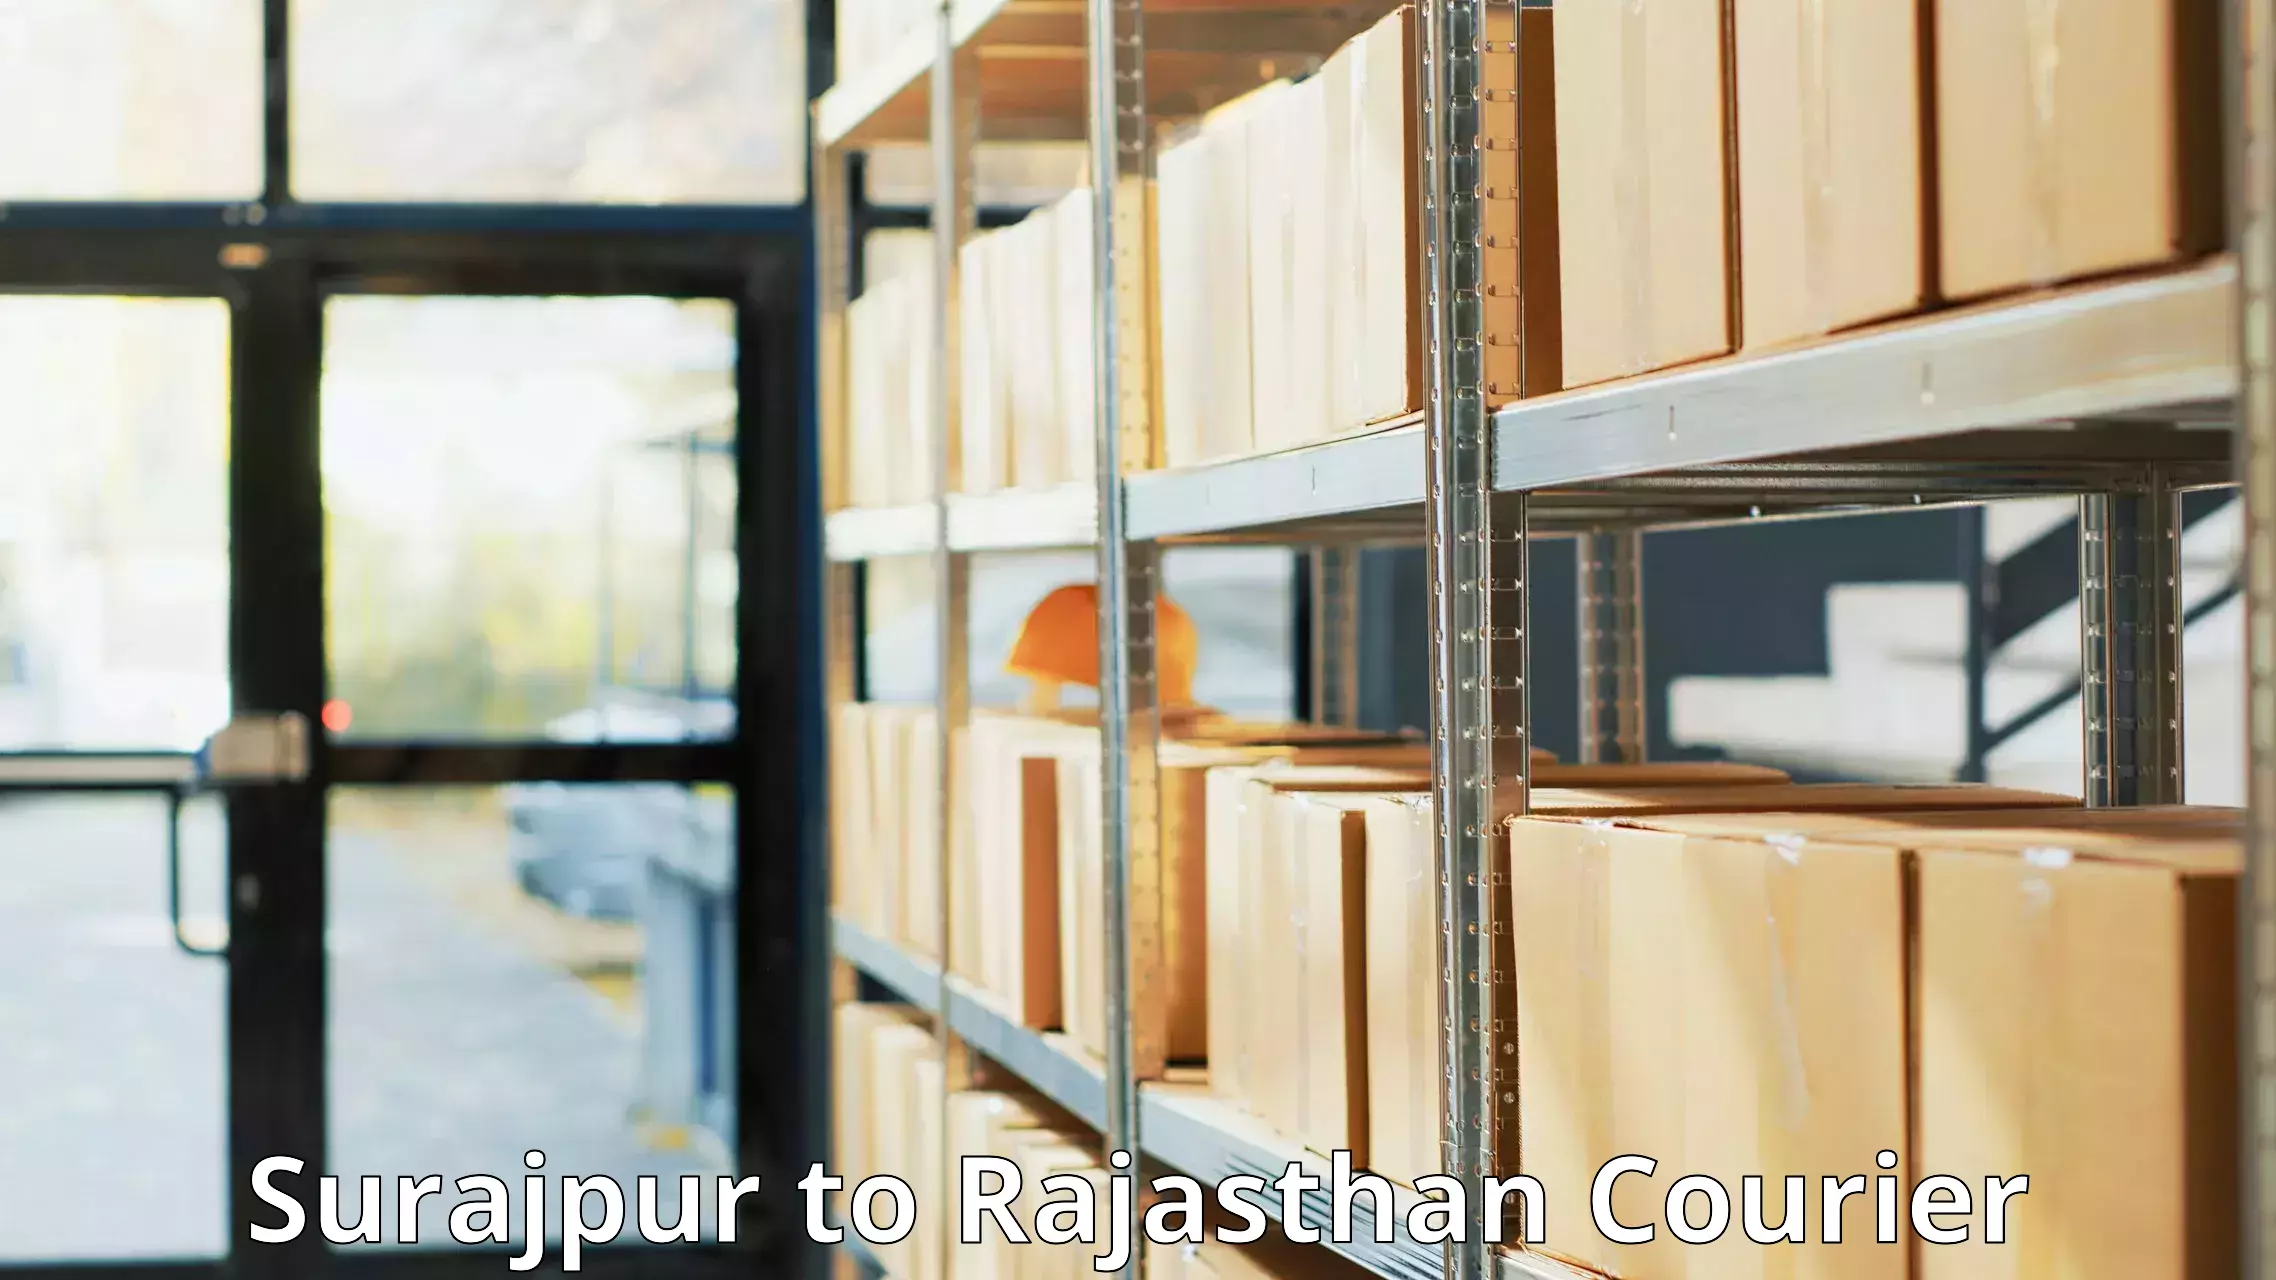 State-of-the-art courier technology Surajpur to Rajasthan